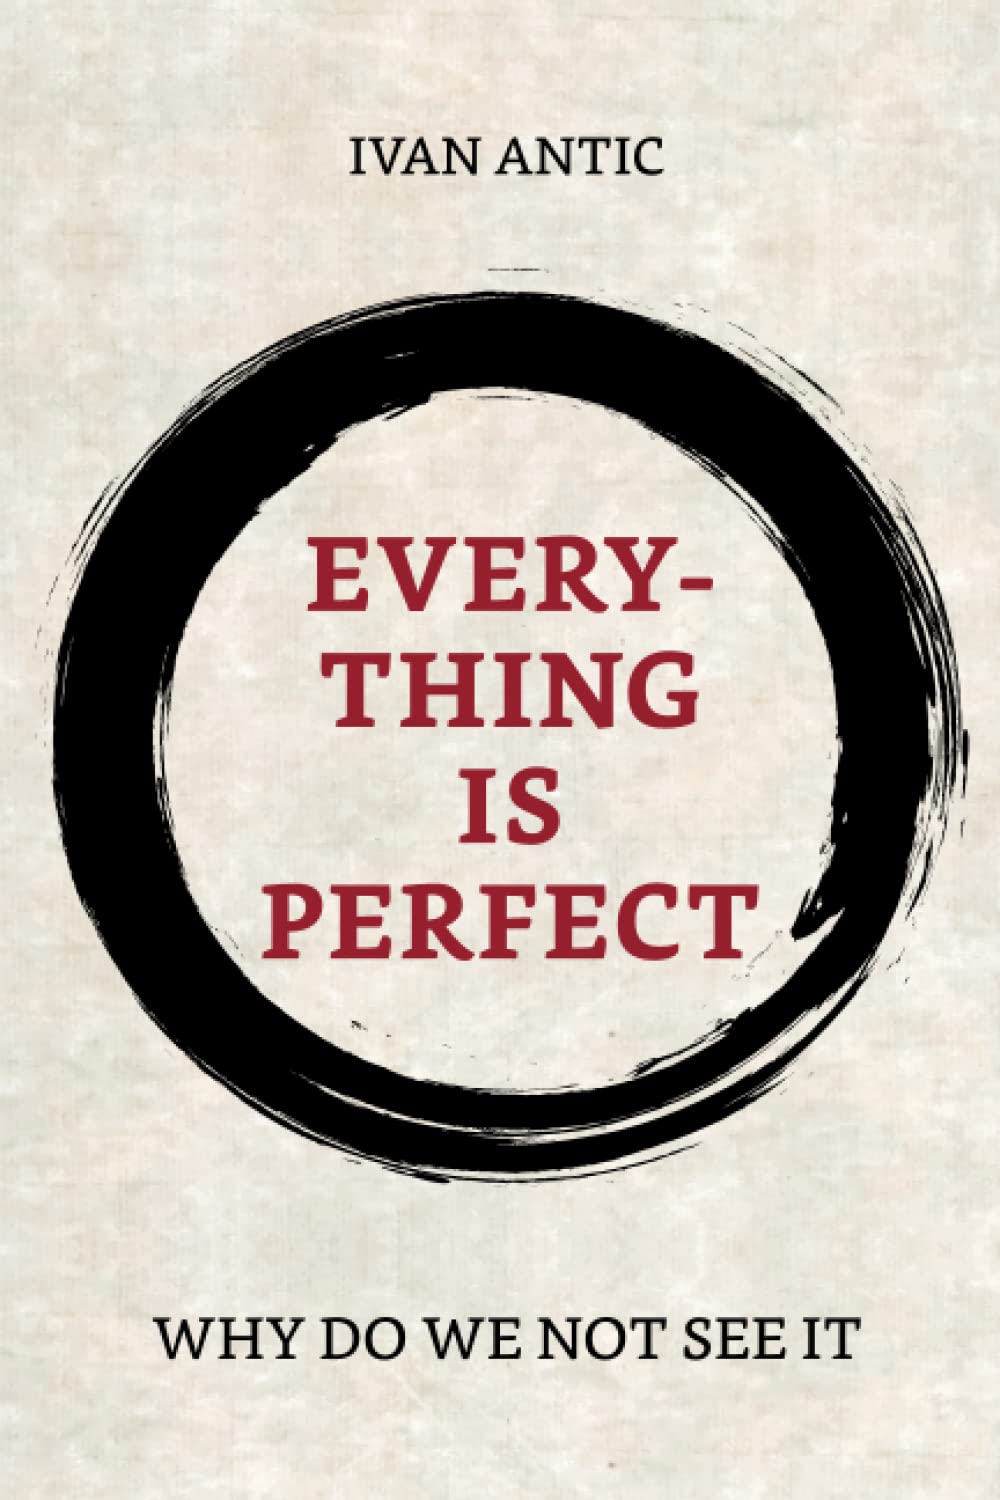 Everything is perfect: Why Do We Not See It (Existence - Consciousness - Bliss) - Epub + Converted PDF